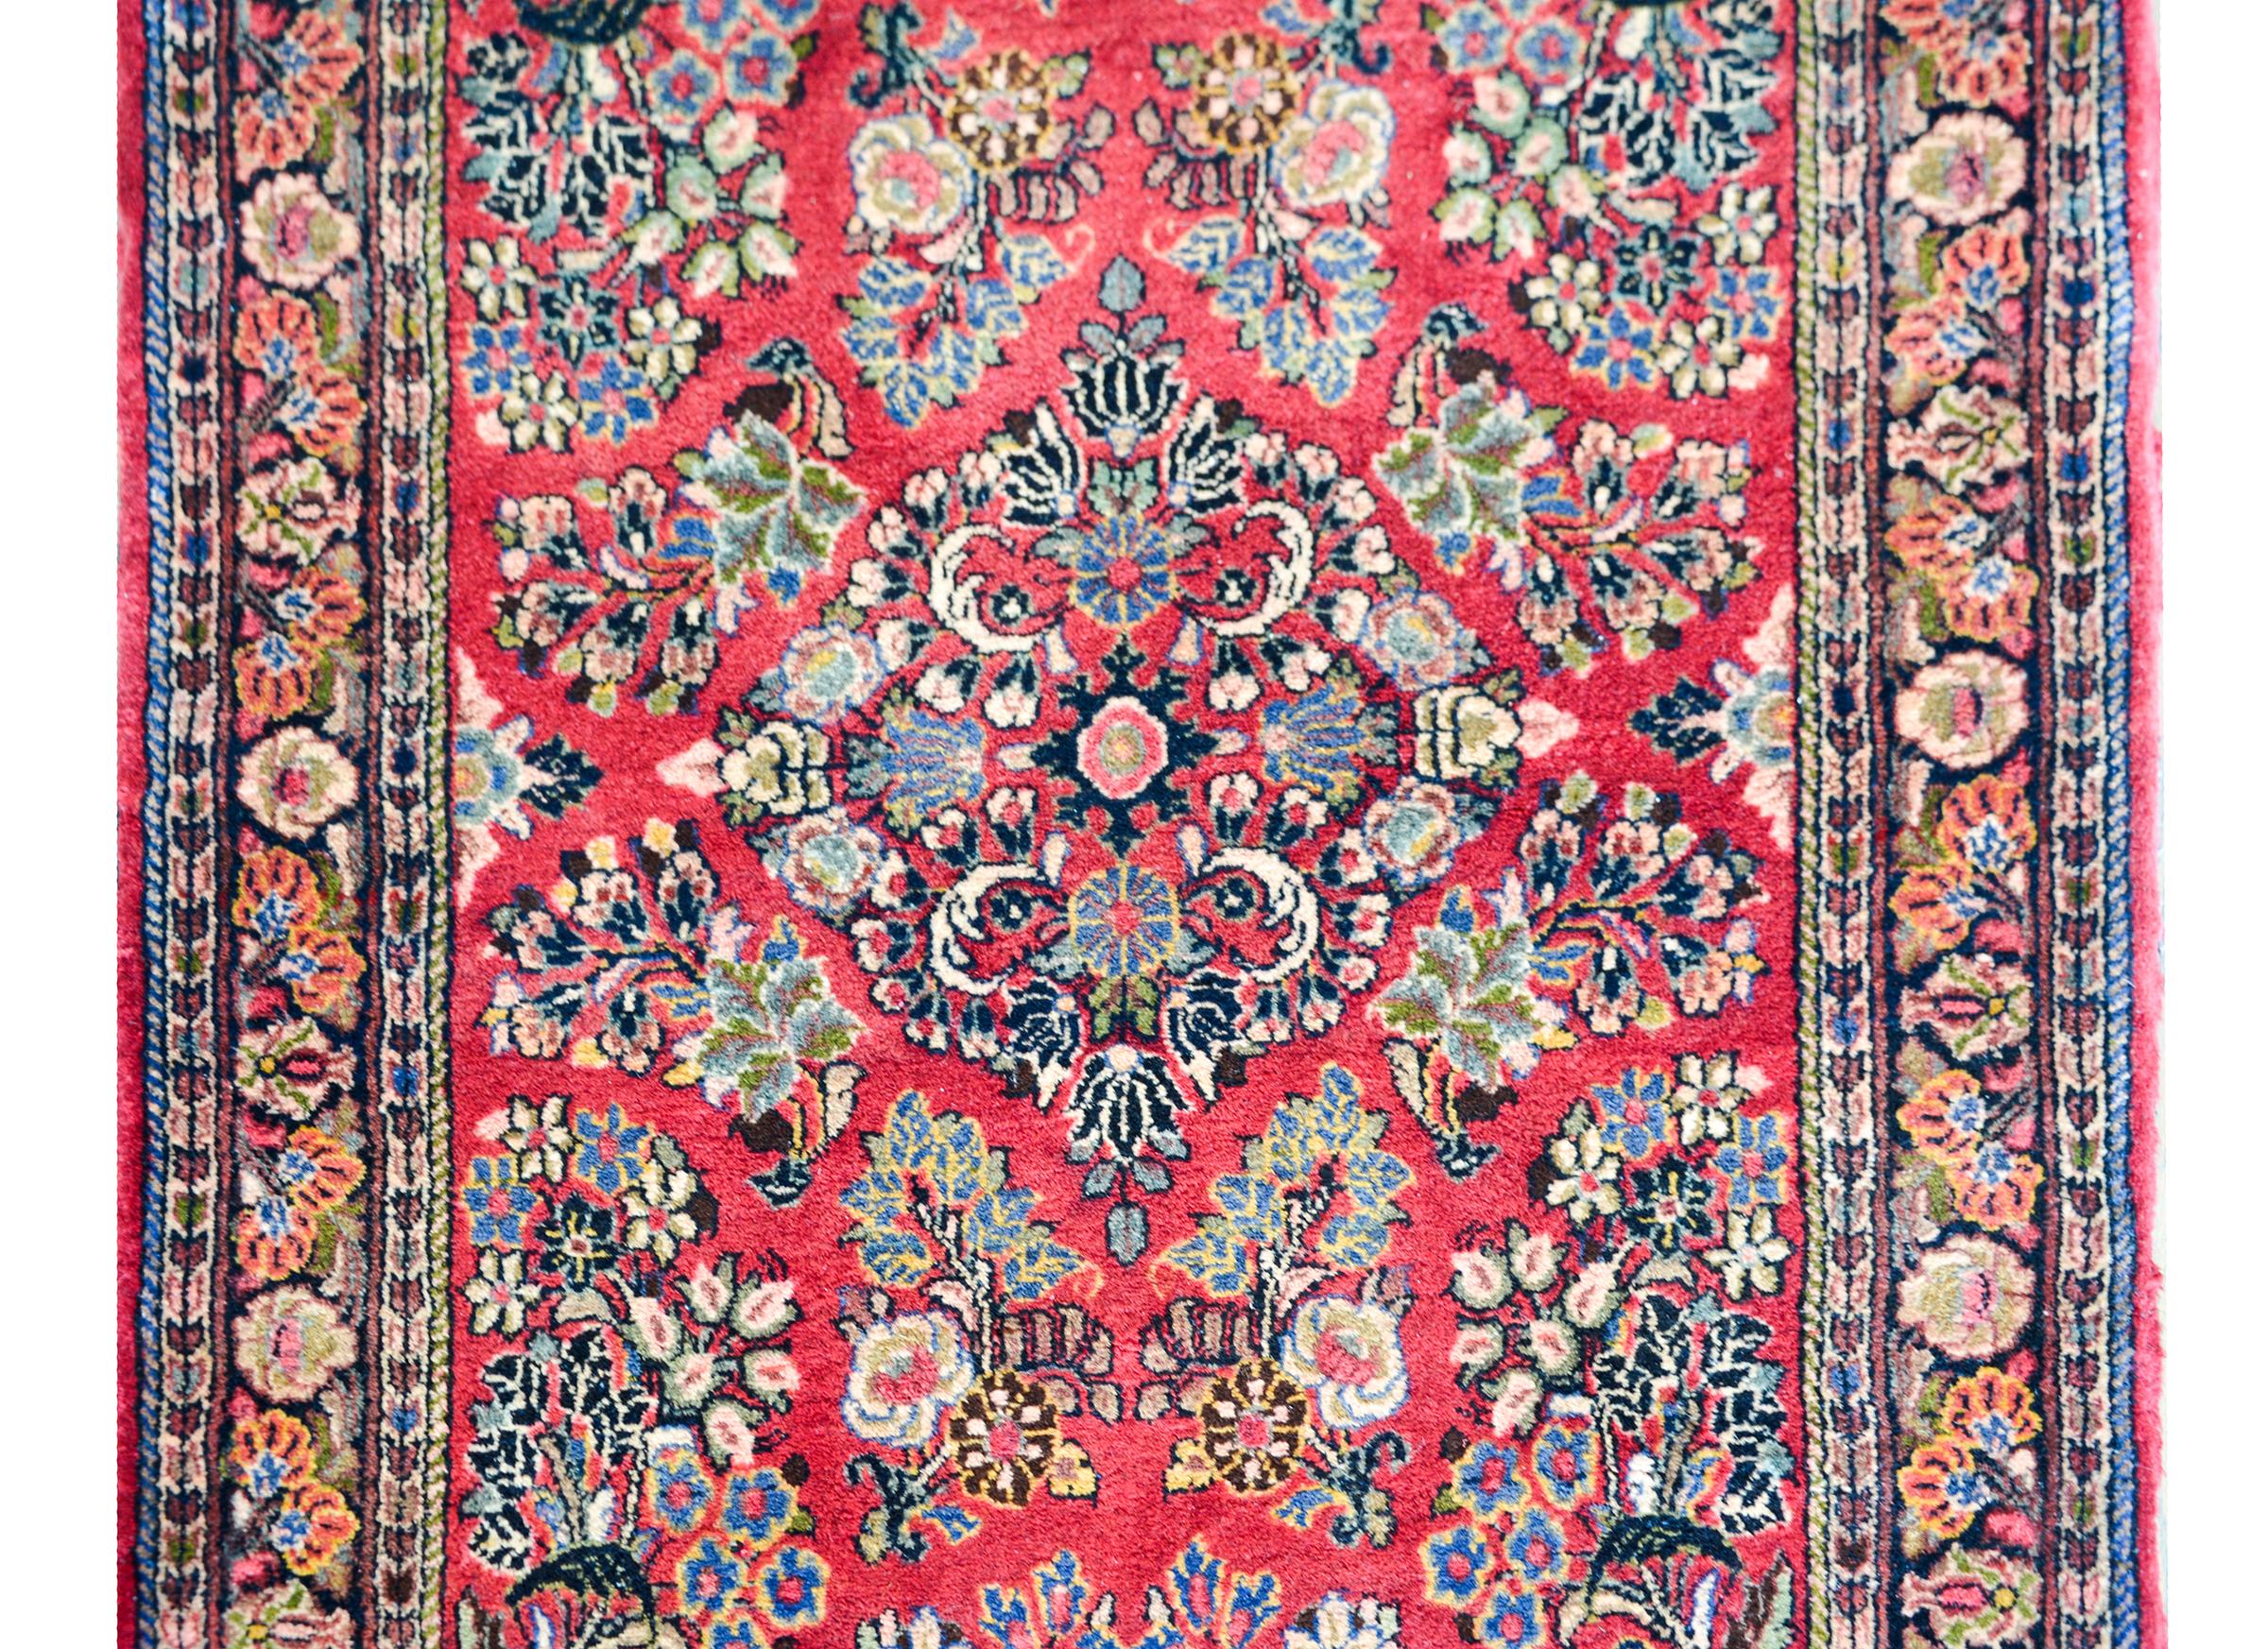 A beautiful early 20th century Persian Sarouk runner with an all-over mirrored floral cluster pattern woven in myriad colors and surrounded by a border with multiple thin floral patterned stripes.